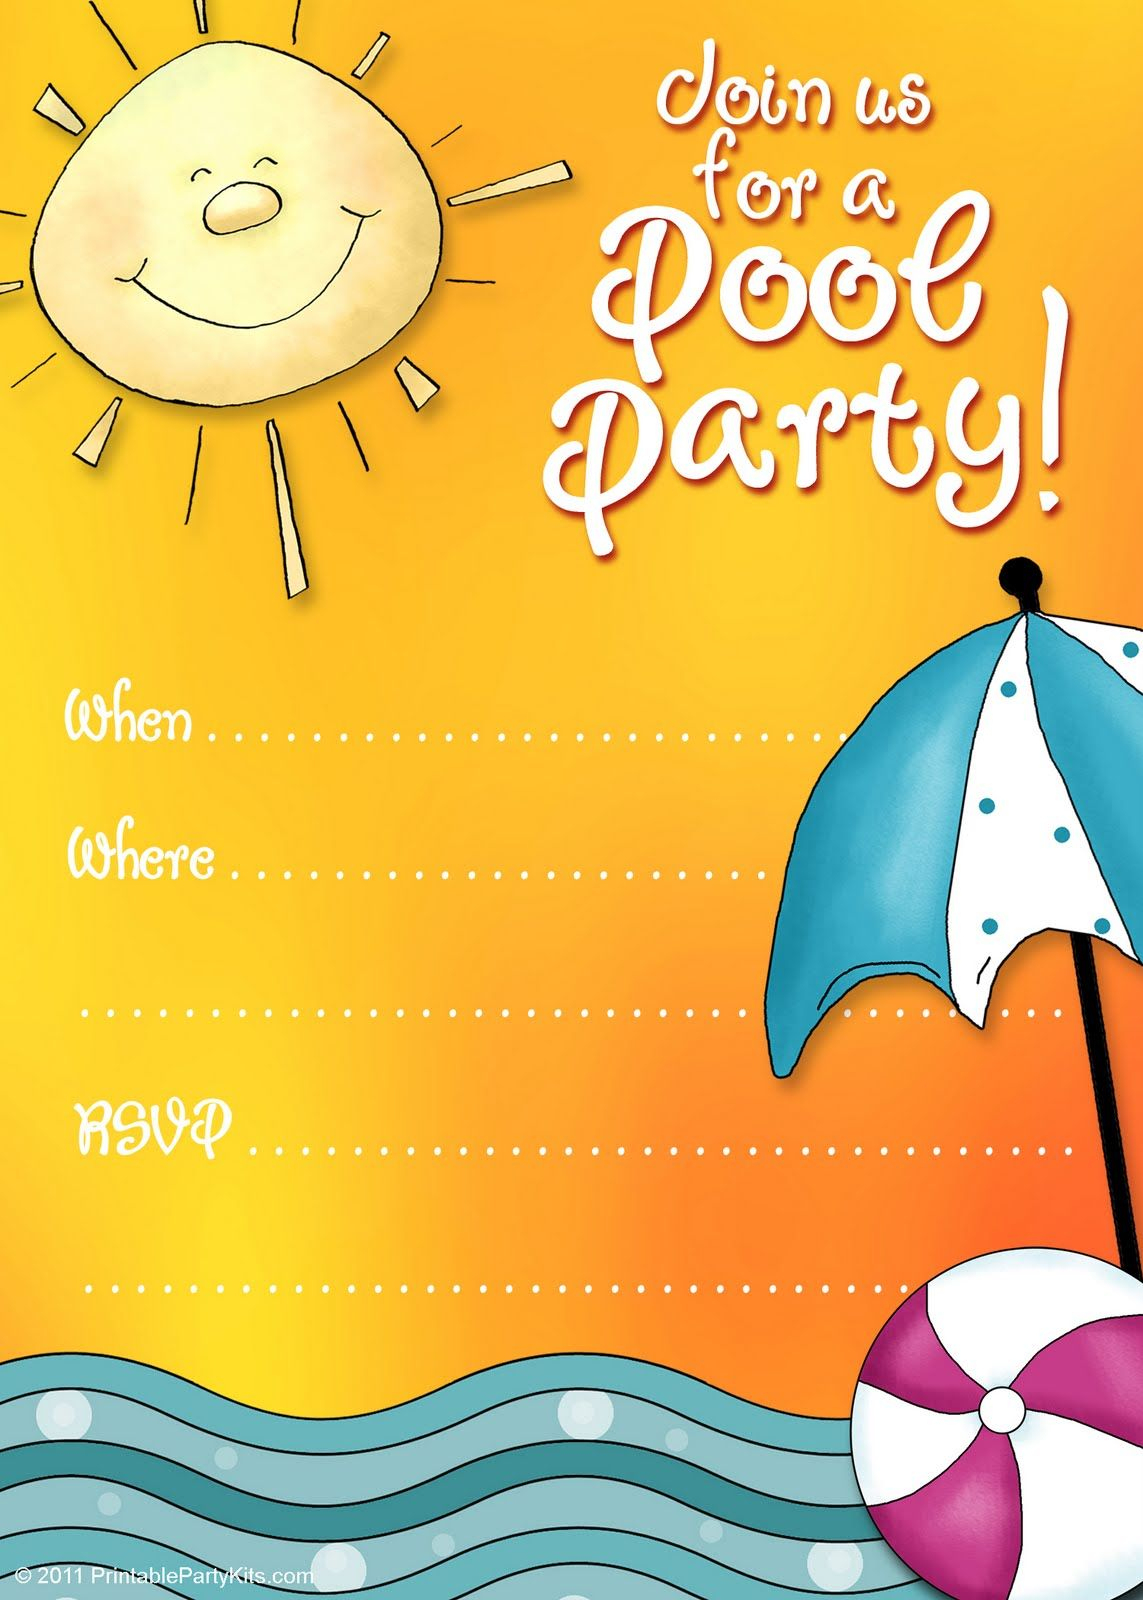 Free Printable Party Invitations: Summer Pool Party Invites - Free Printable Pool Party Invitations